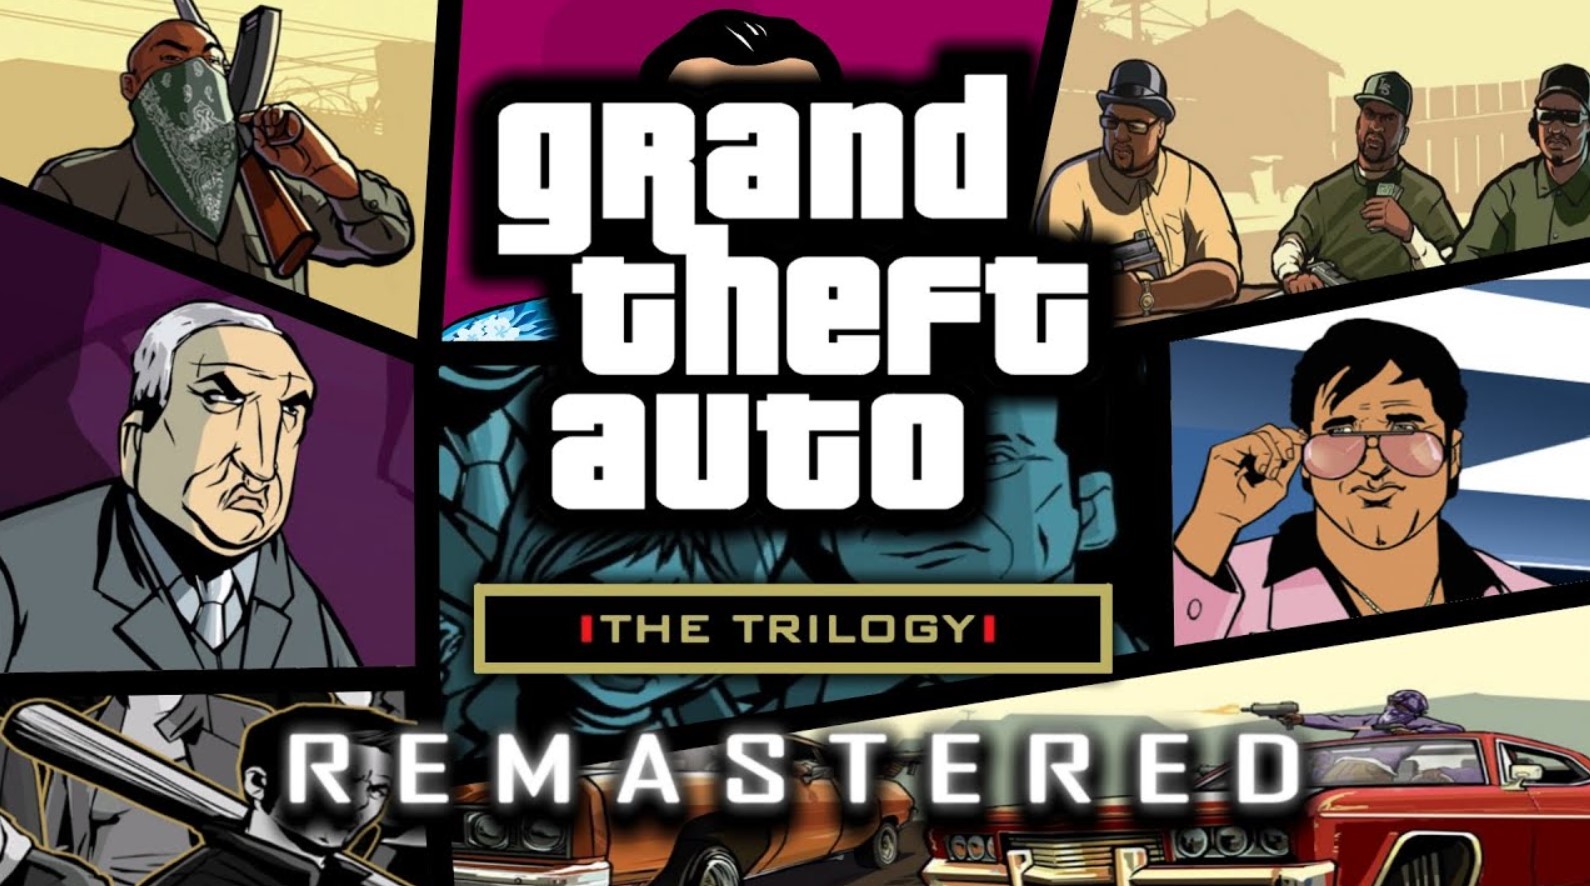 Grand Theft Auto The Trilogy The Definitive Edition Mod Apk 1.0 (100% Working, tested!)